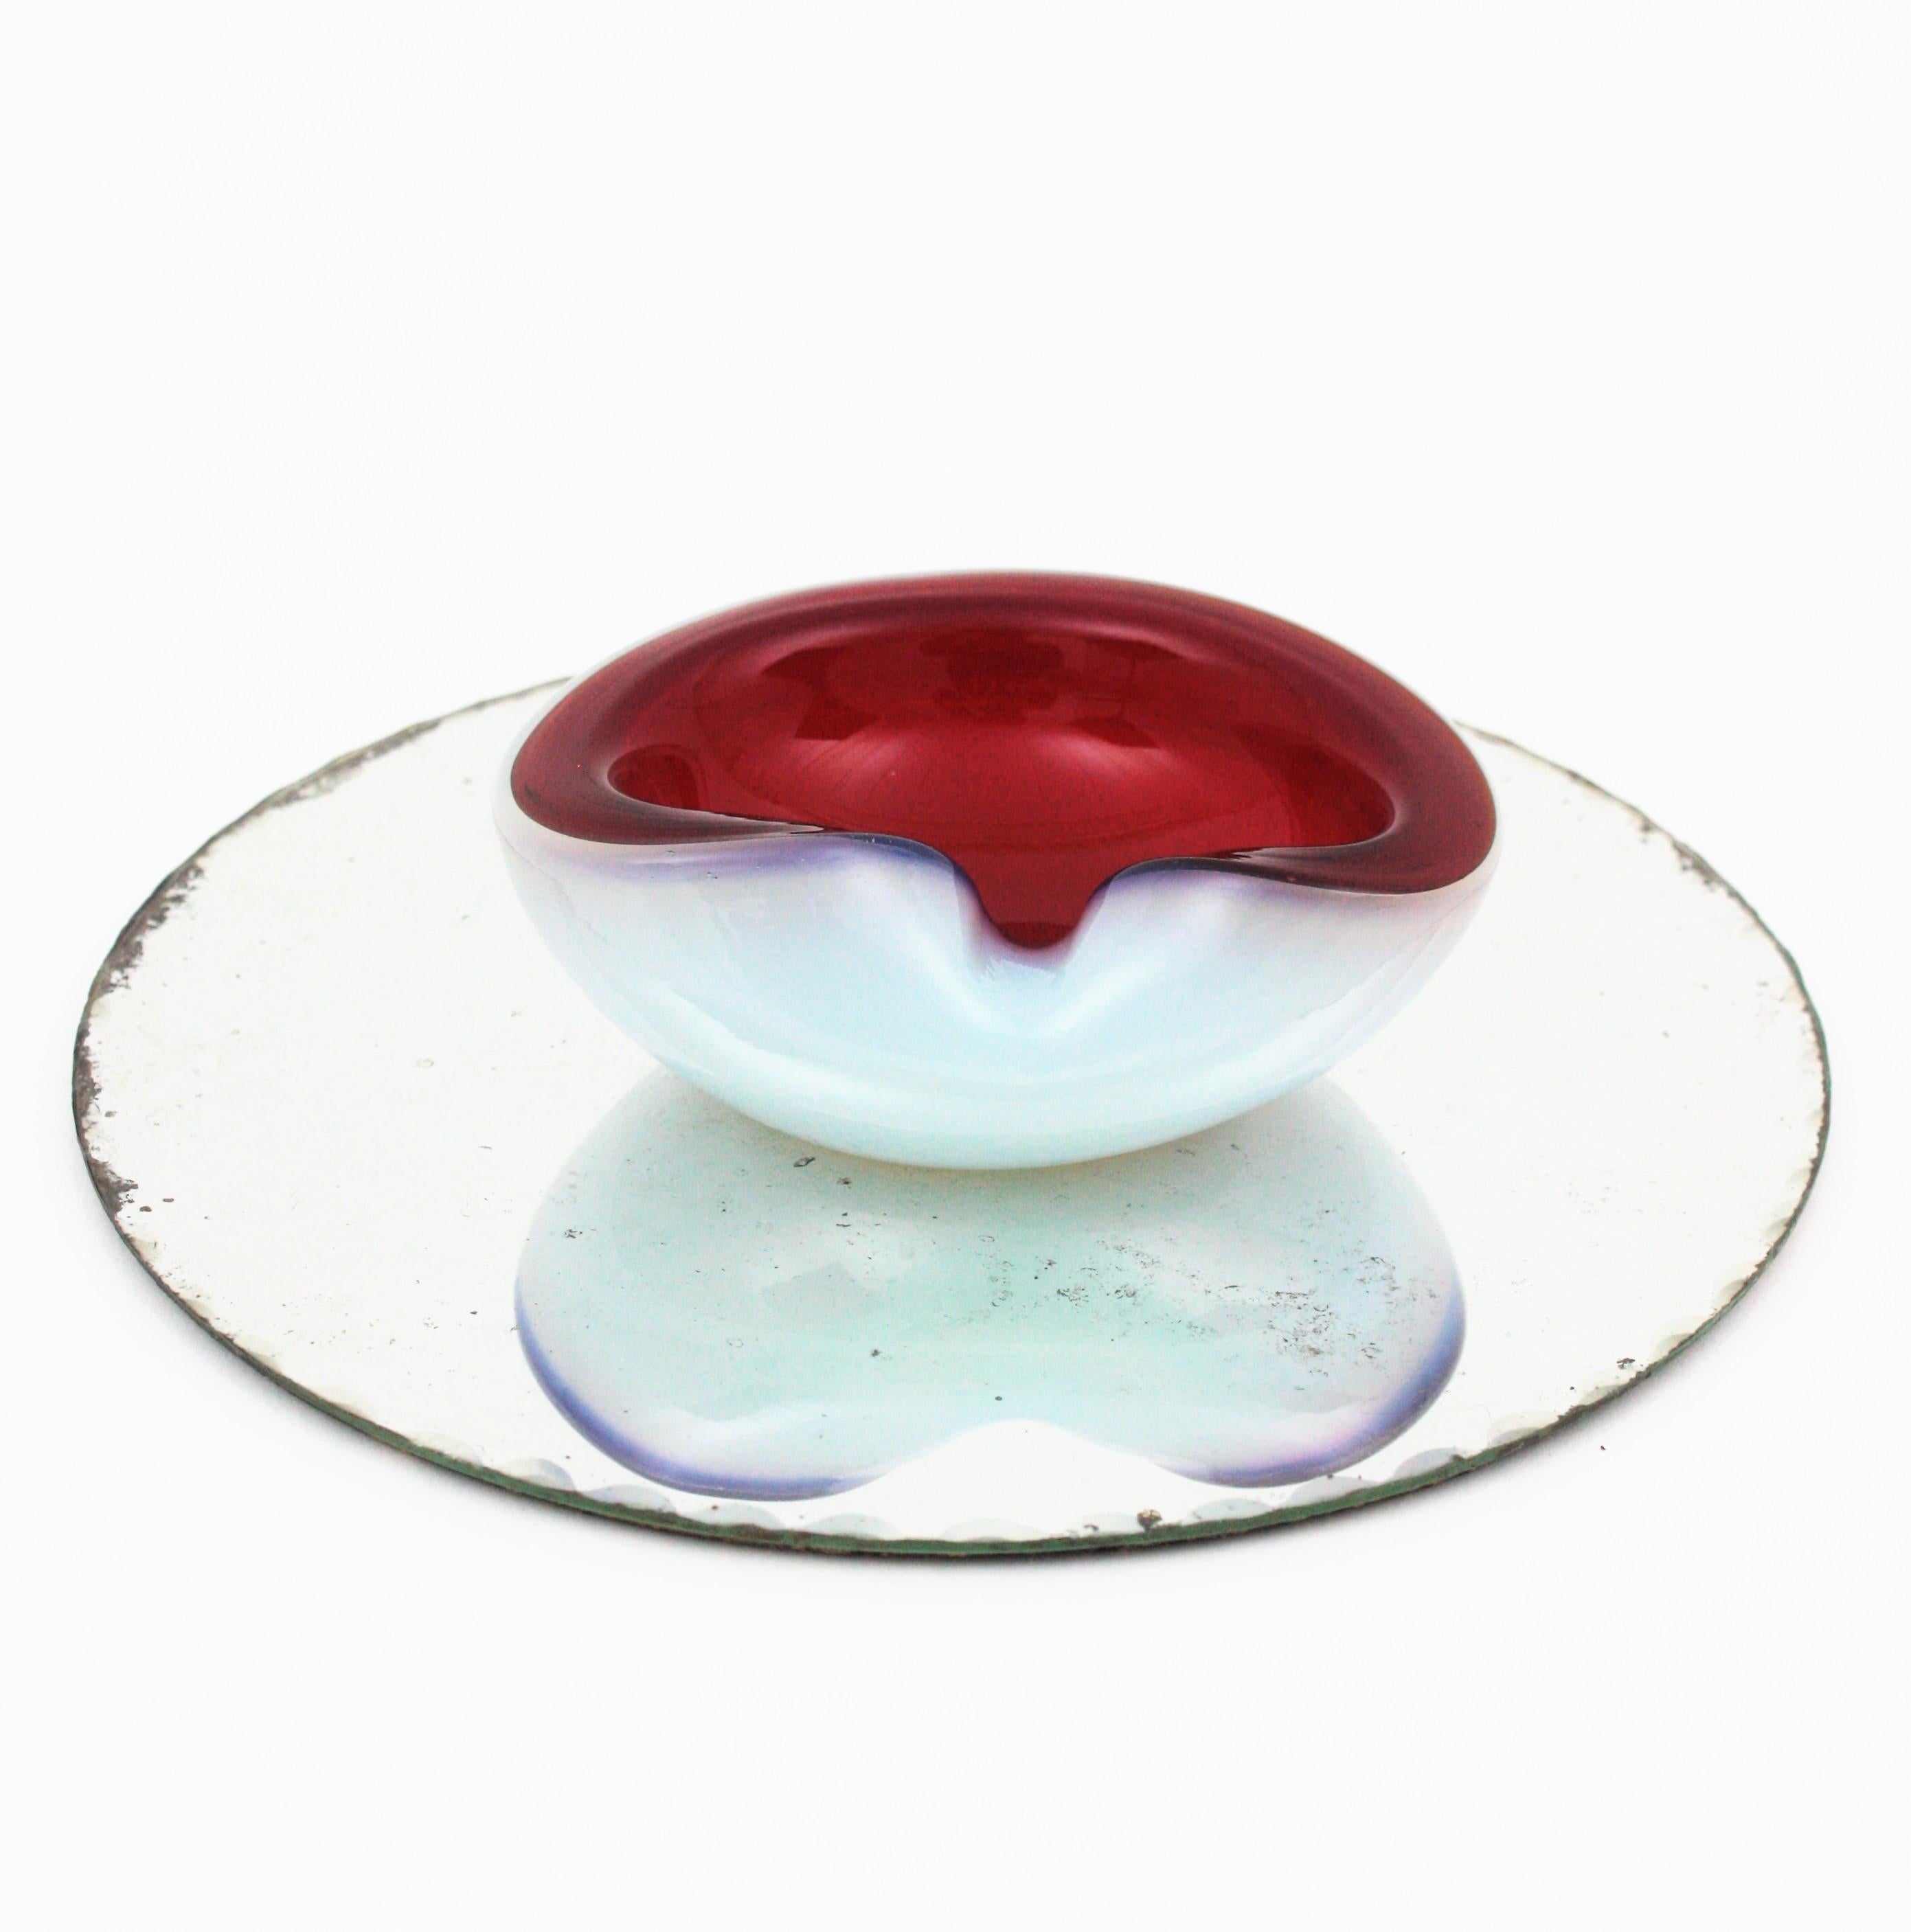 Italian 1950s Archimede Seguso Opal White and Red Alabastro Geode Glass Bowl 10